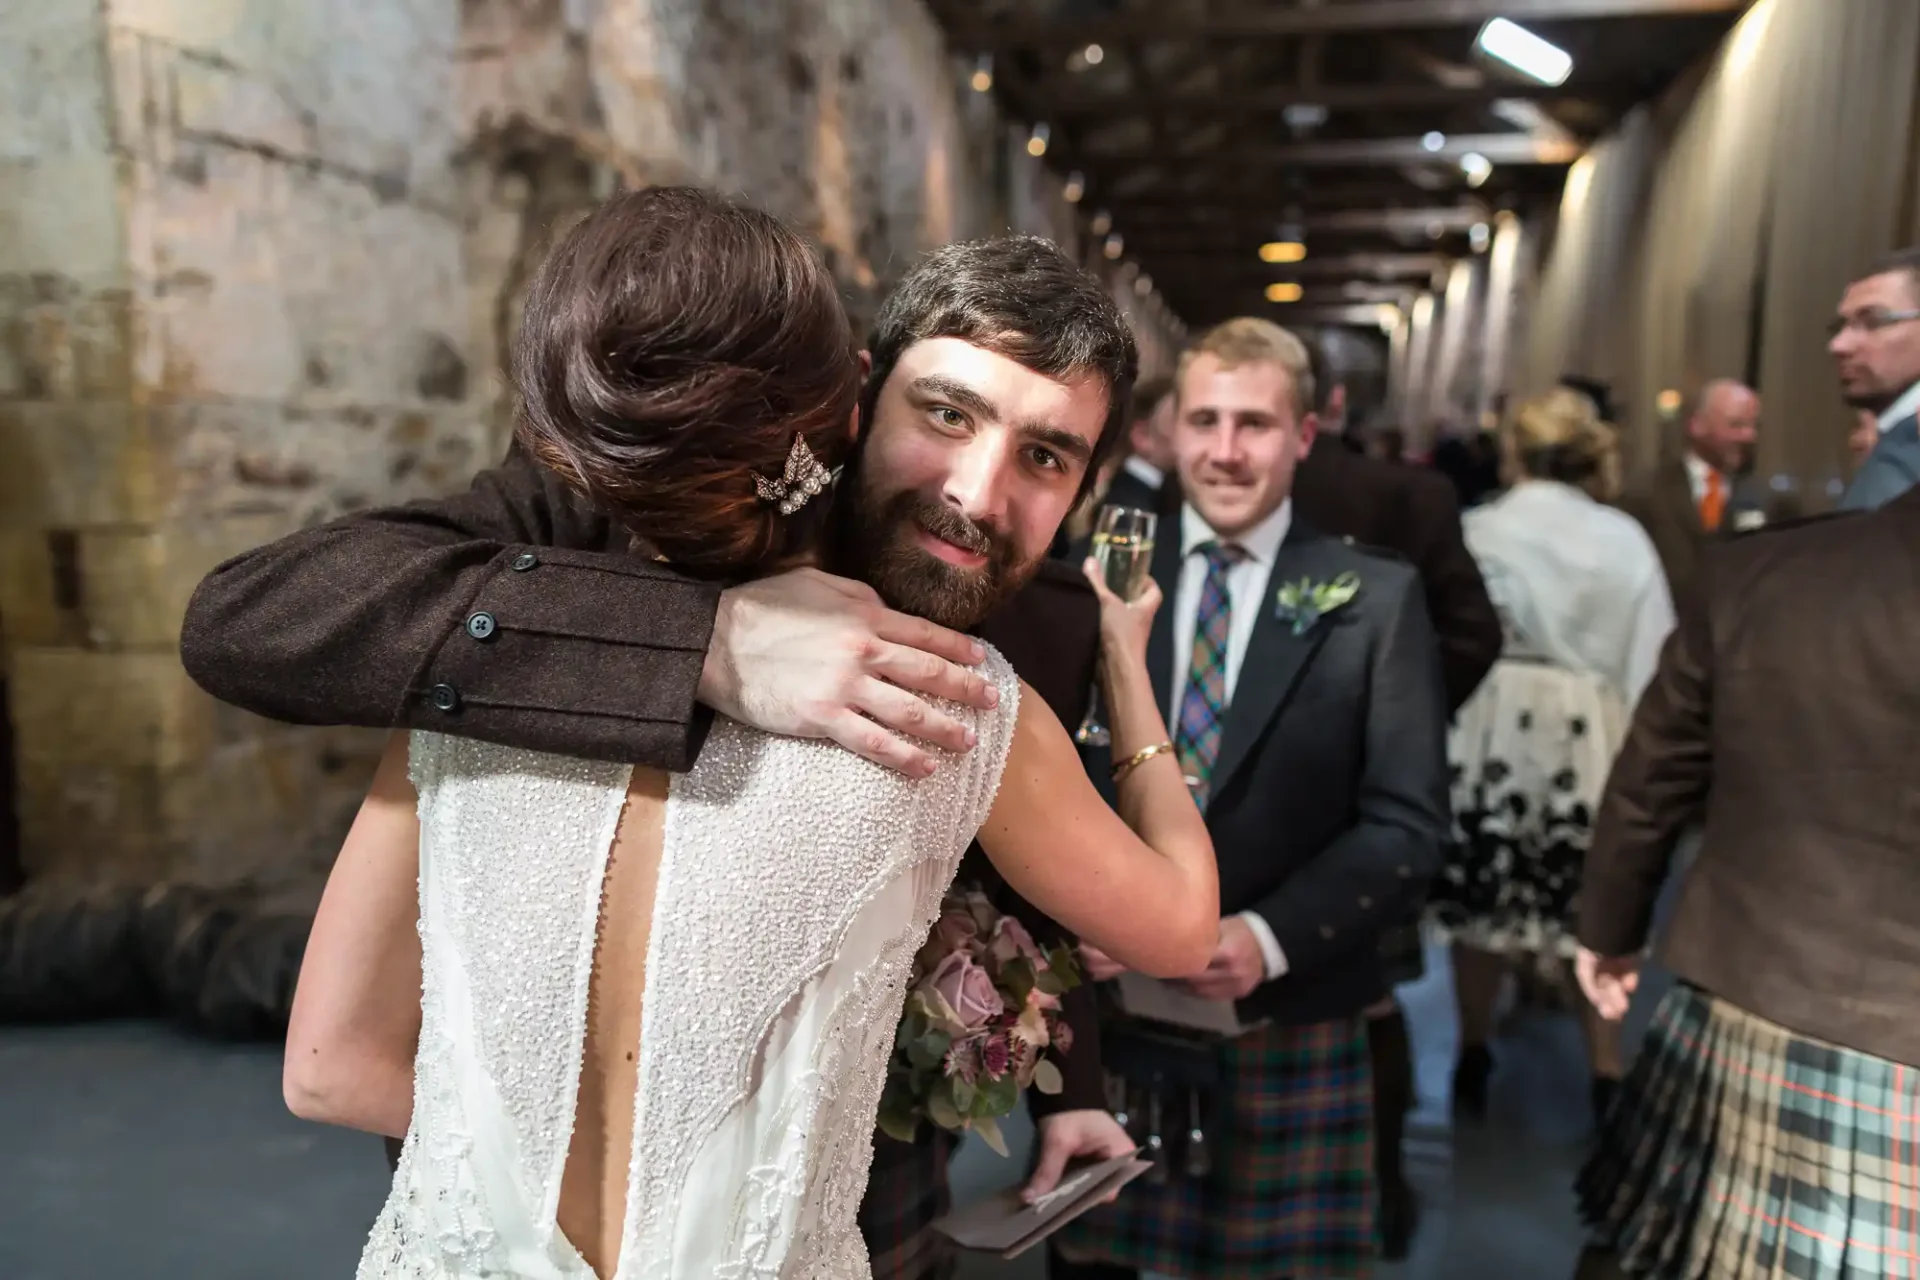 A bride embracing a man at a wedding reception, with a man in a kilt holding a glass of wine in the background.